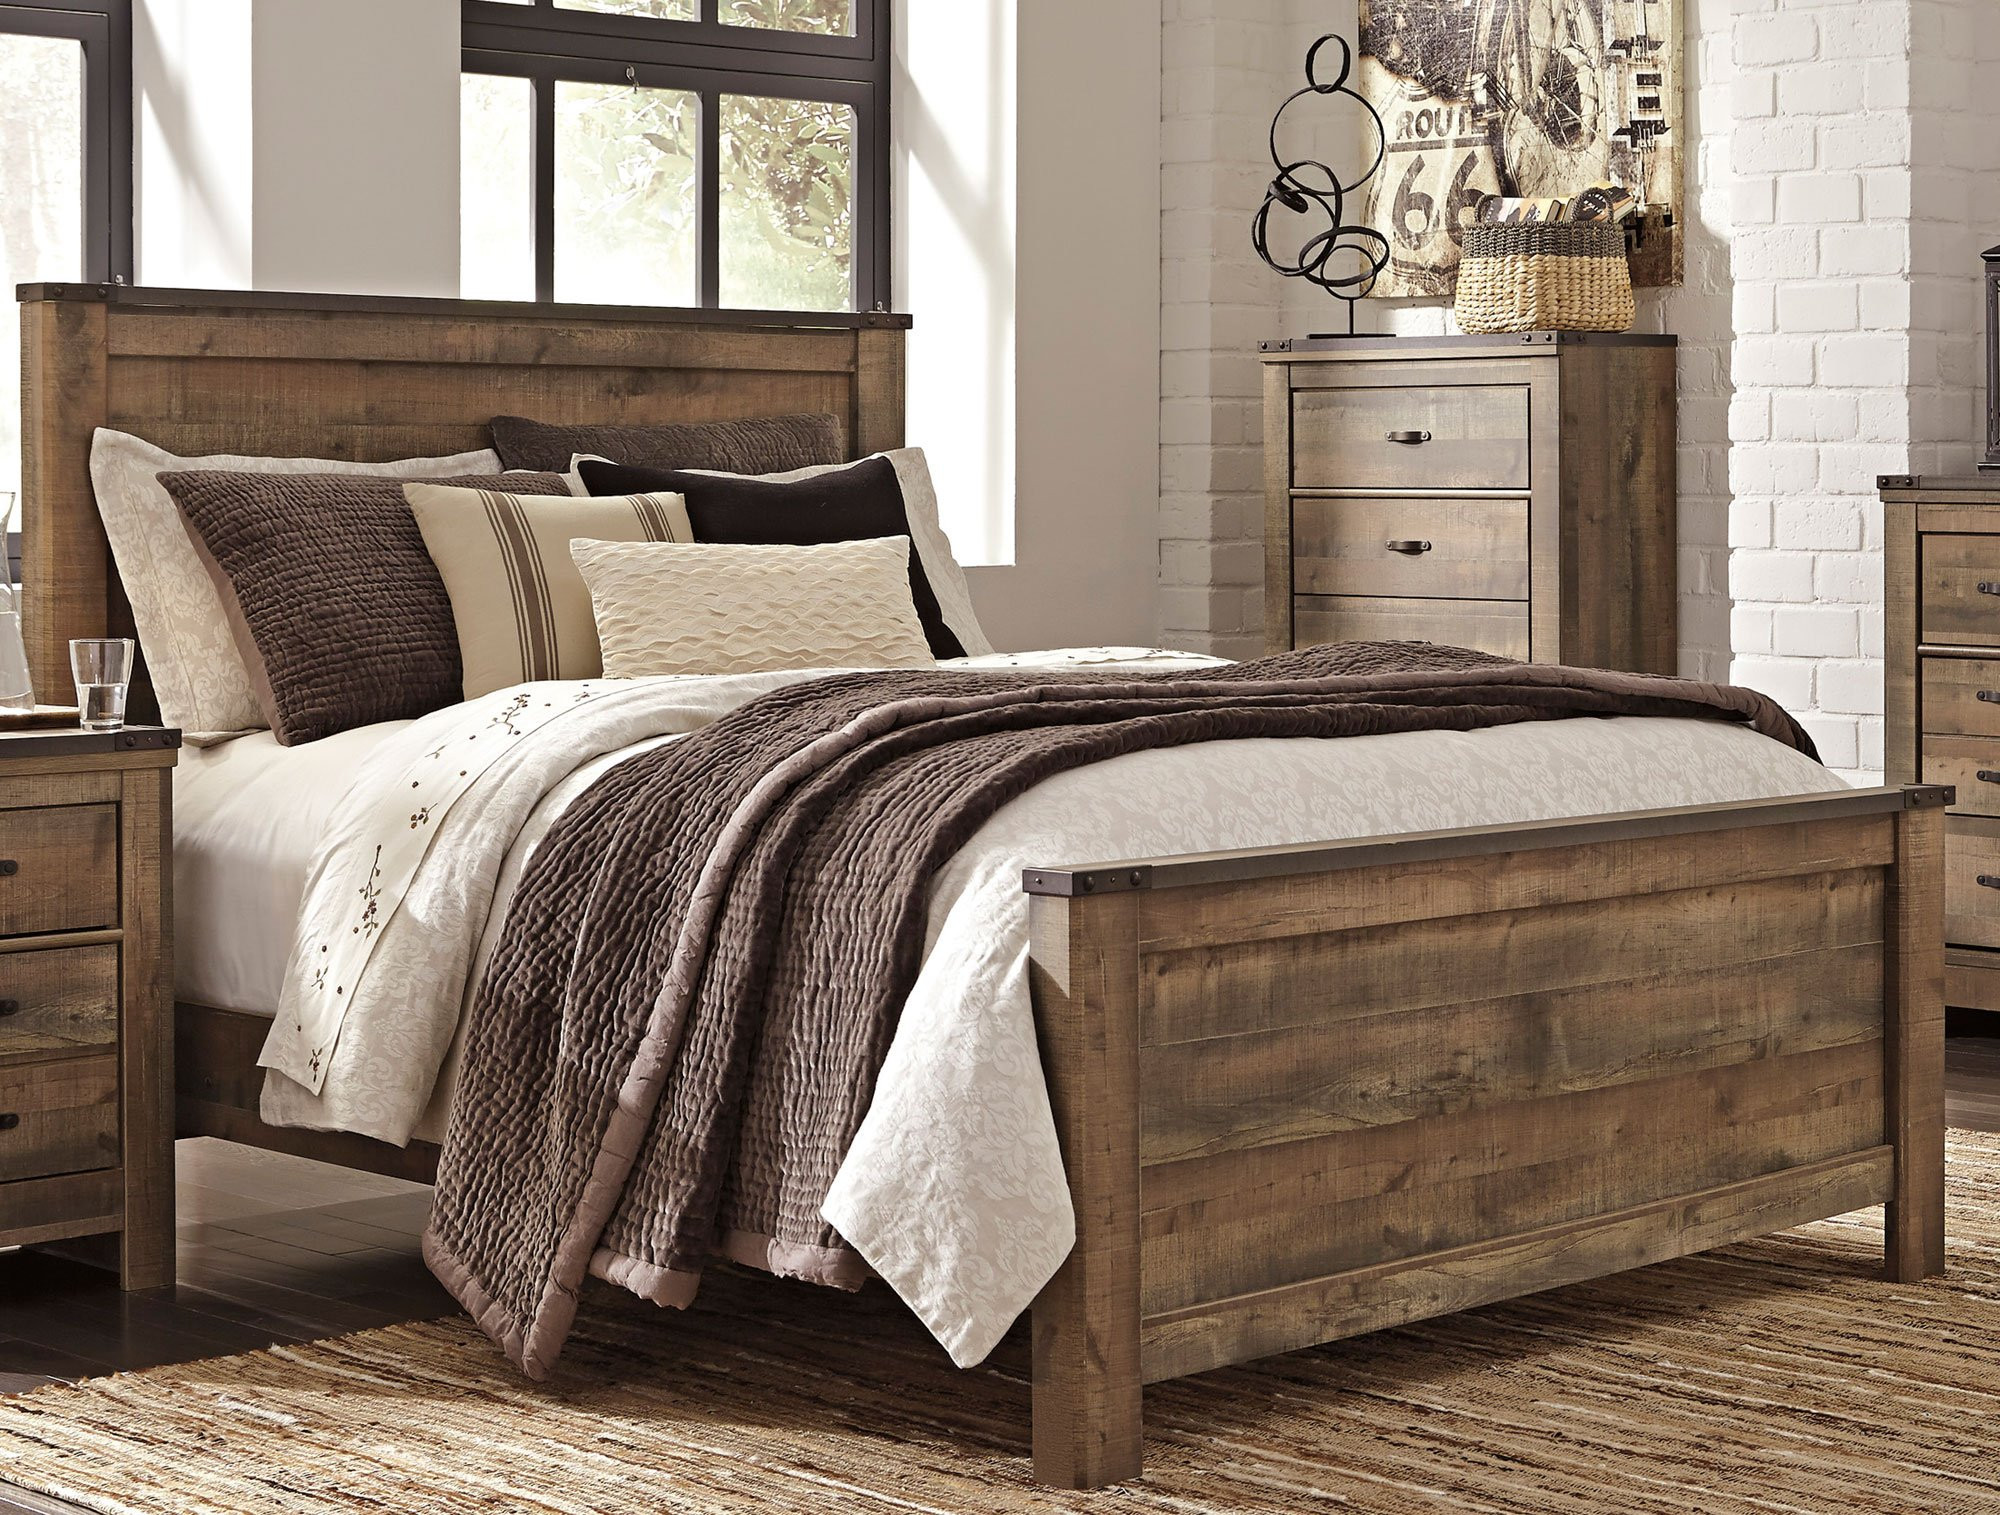 Rustic King Bedroom Set Awesome Rustic Casual Contemporary 6 Piece King Bedroom Set